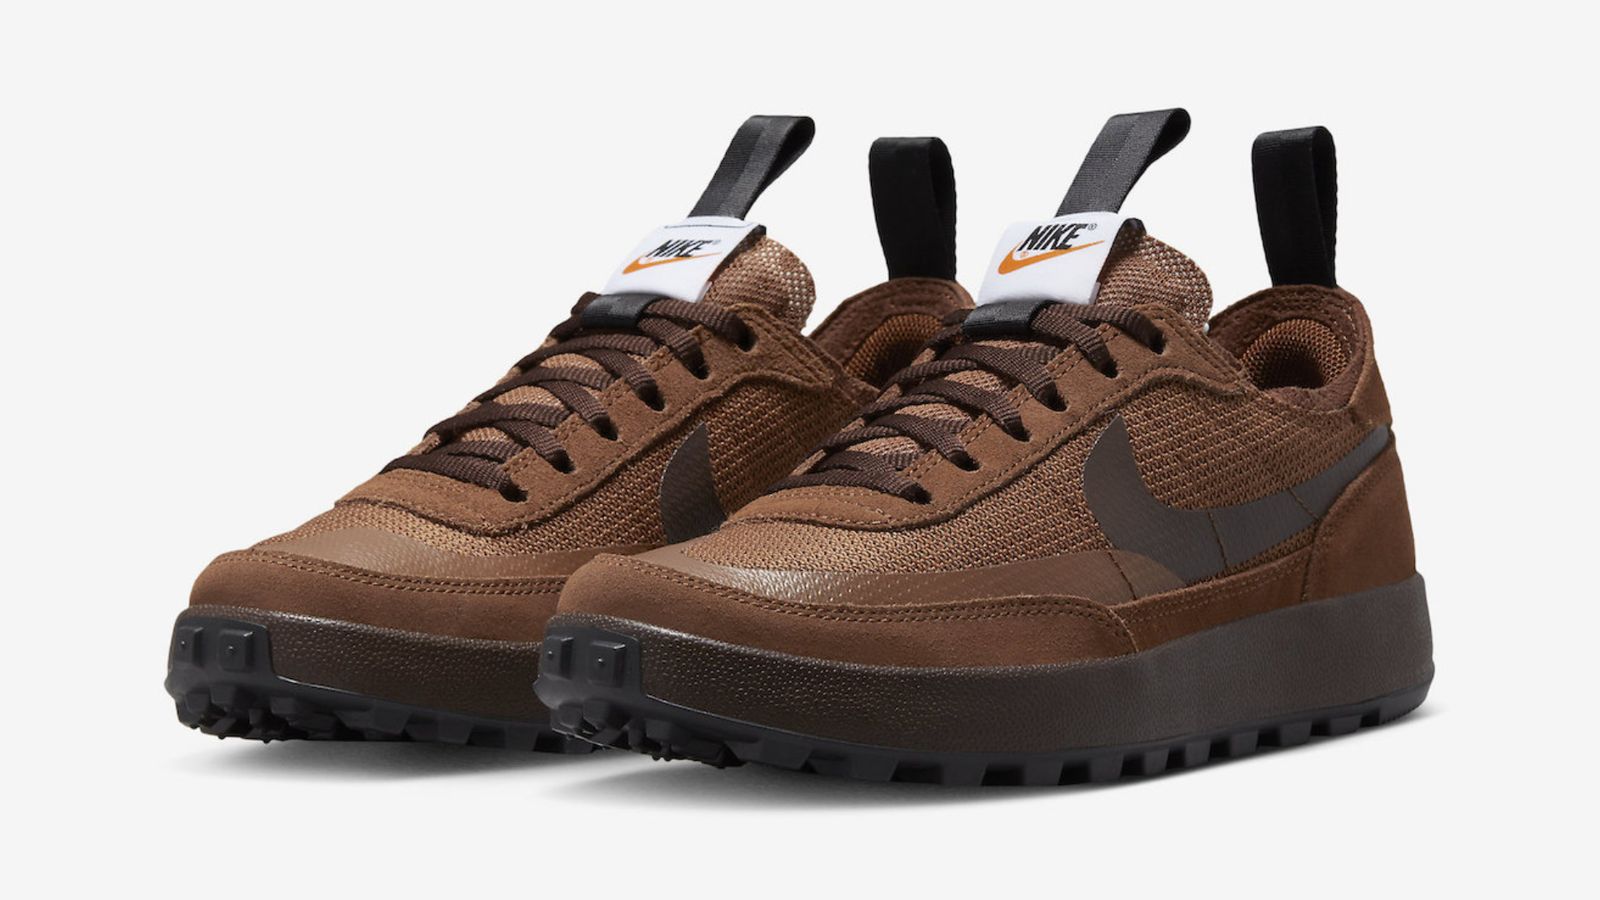 Tom Sachs x NikeCraft General Purpose Shoe "Field Brown" product image of all-brown low-tops.